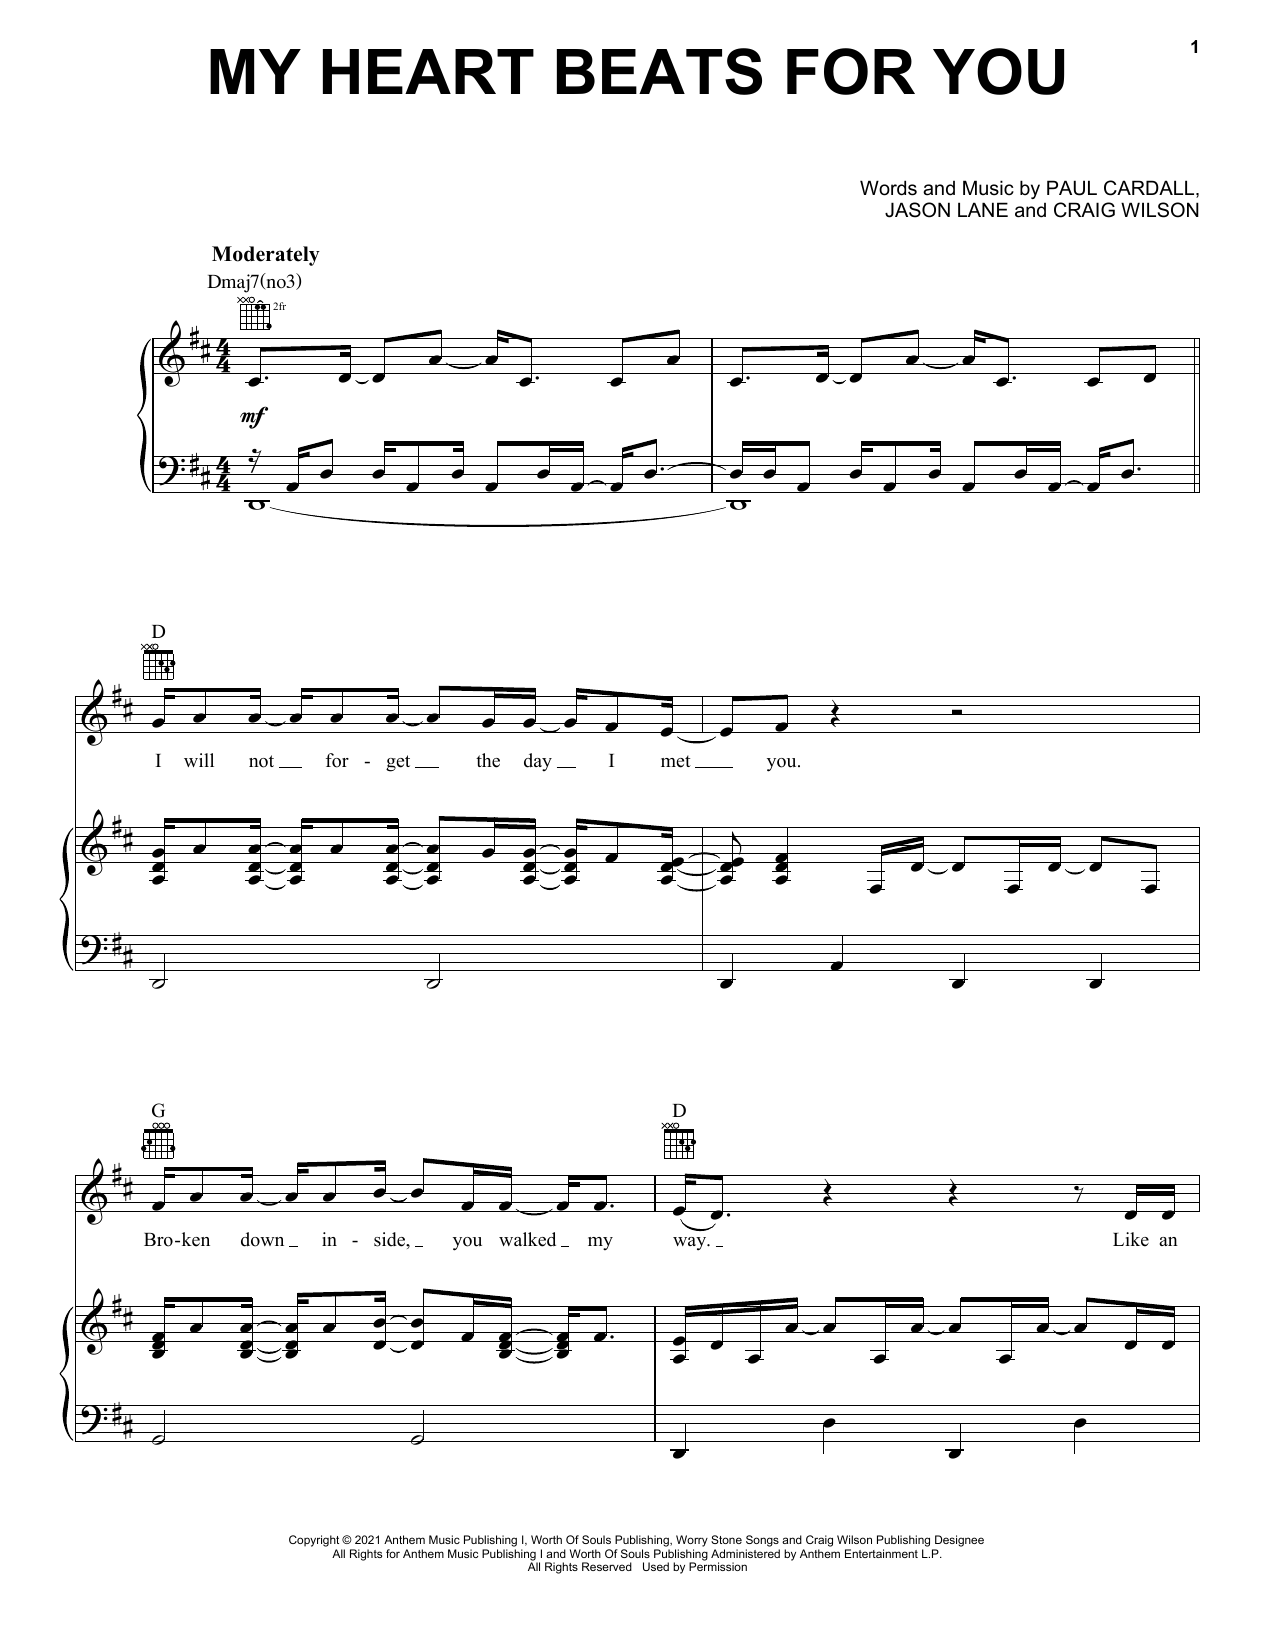 Download Paul Cardall and David Archuleta My Heart Beats For You Sheet Music